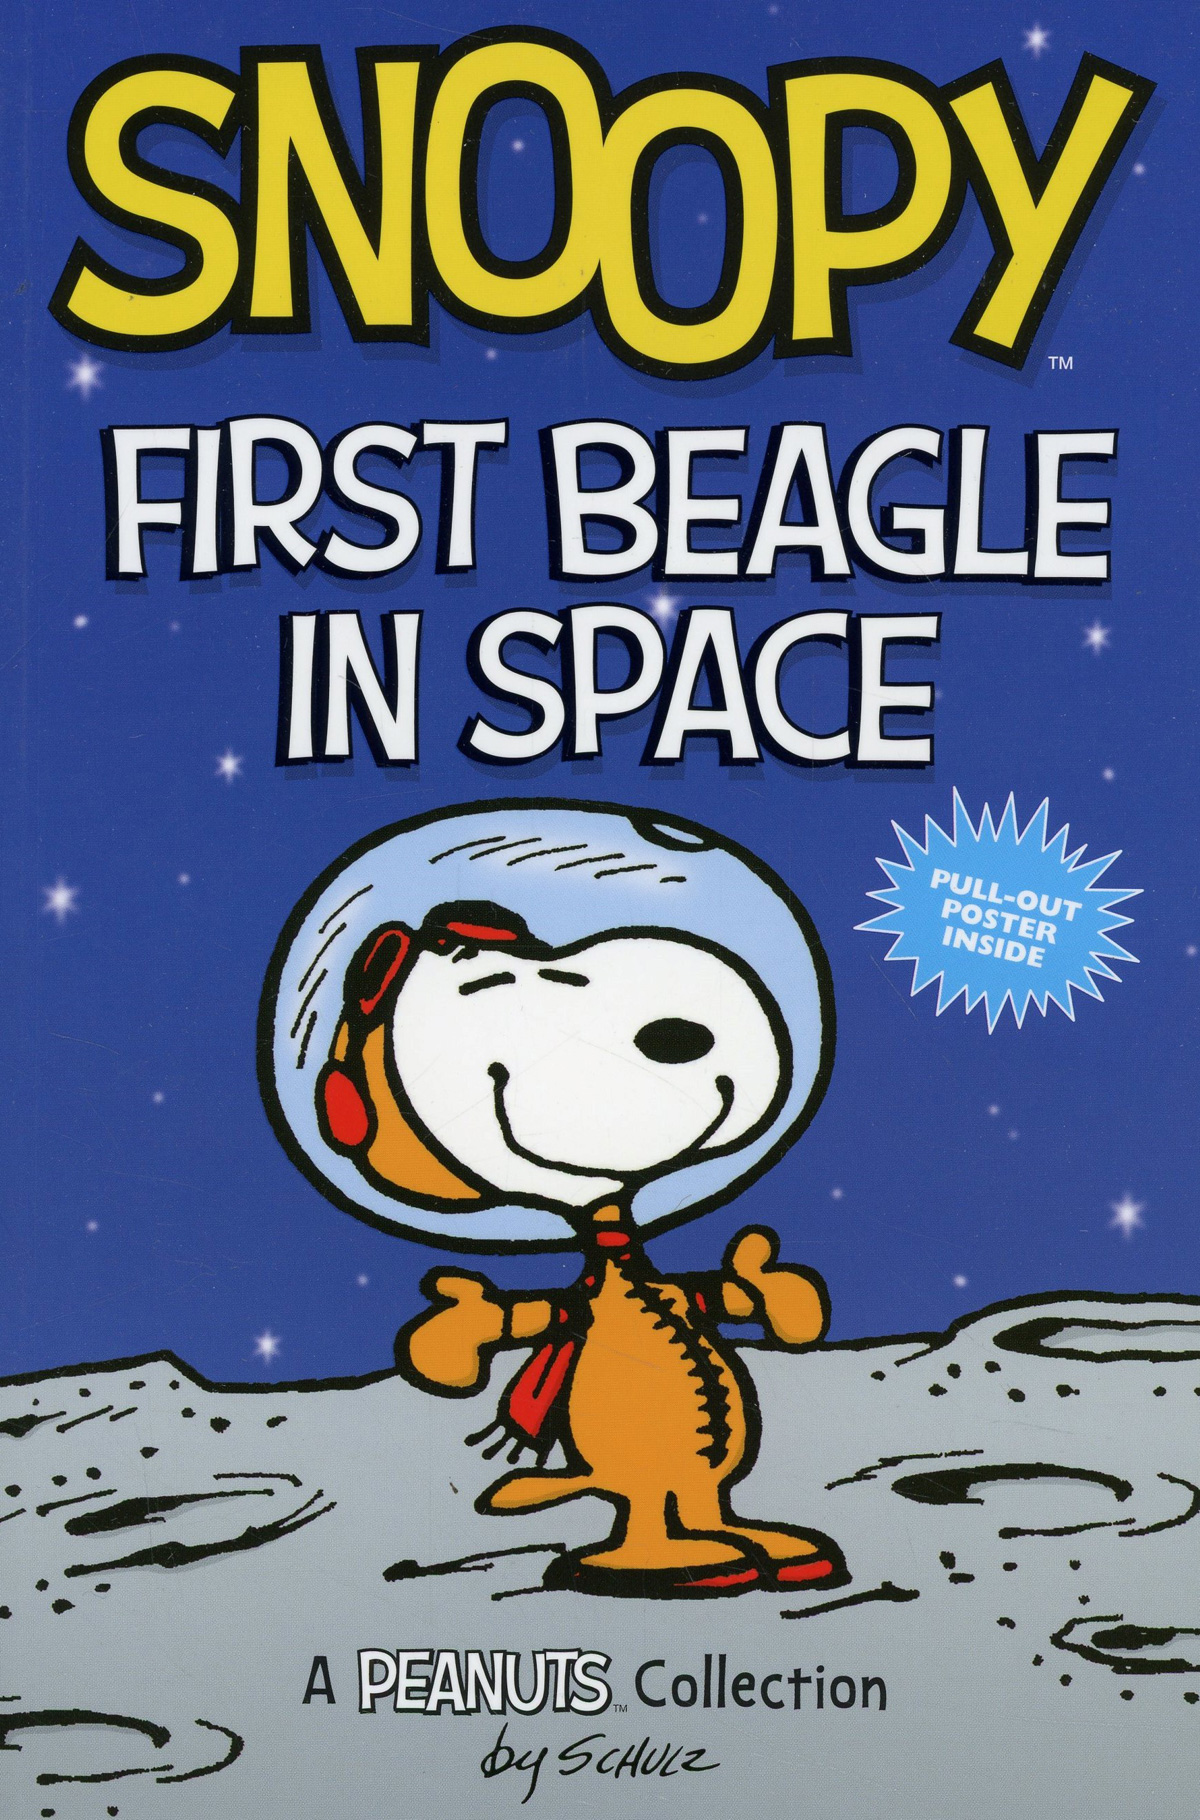 Peanuts Snoopy First Beagle In Space TP